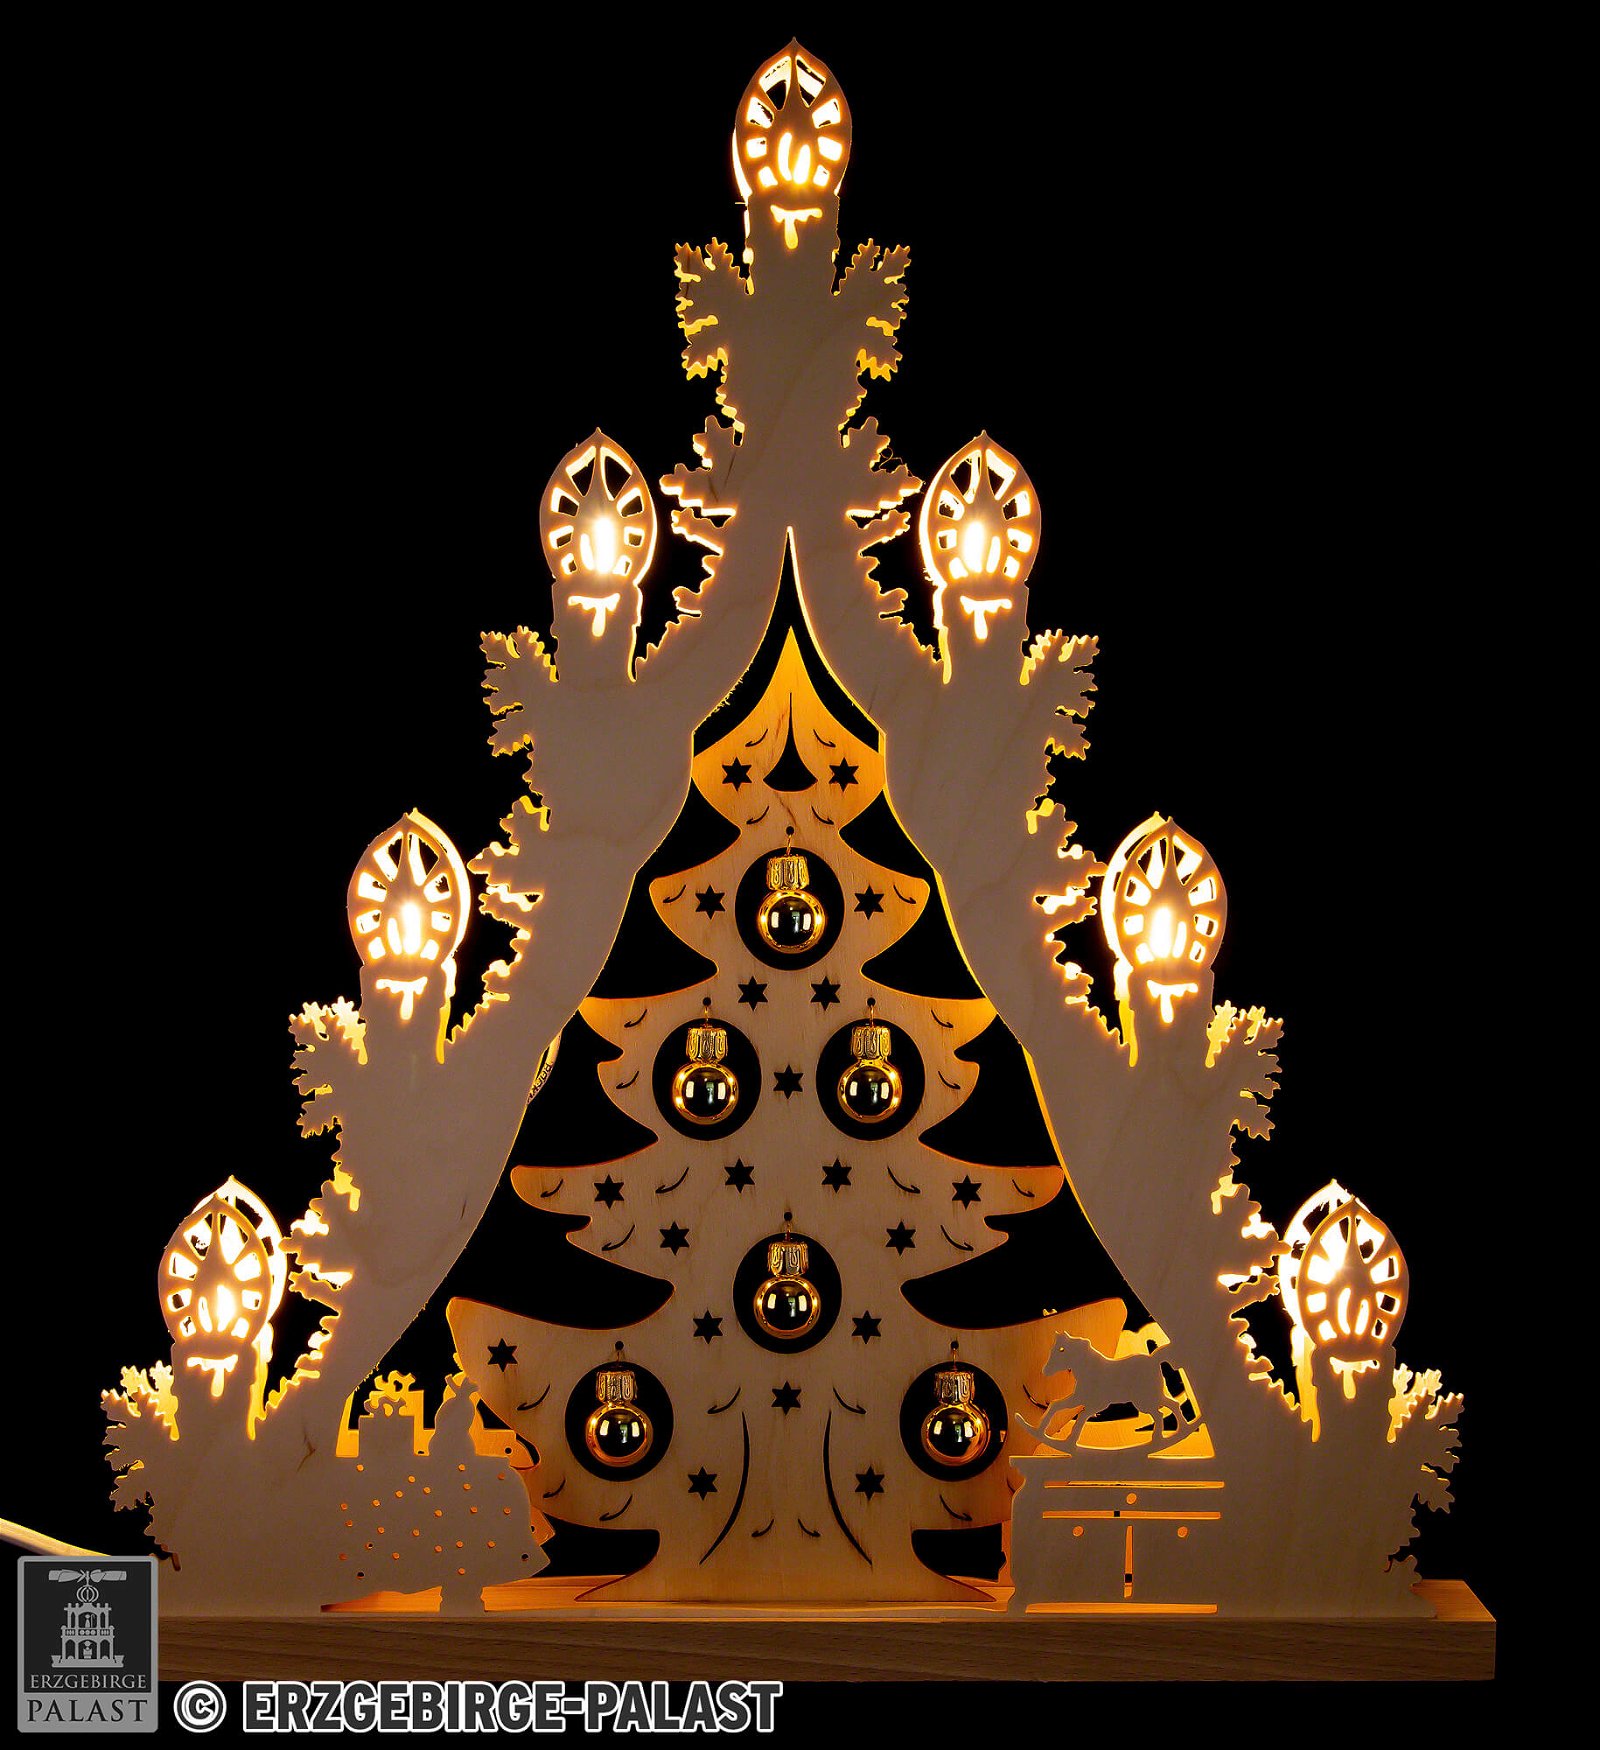 Light Triangle “Christmas Tree with Golden Baubles” (38×44 cm/15×17.3in) by  Weigla Holzkunst